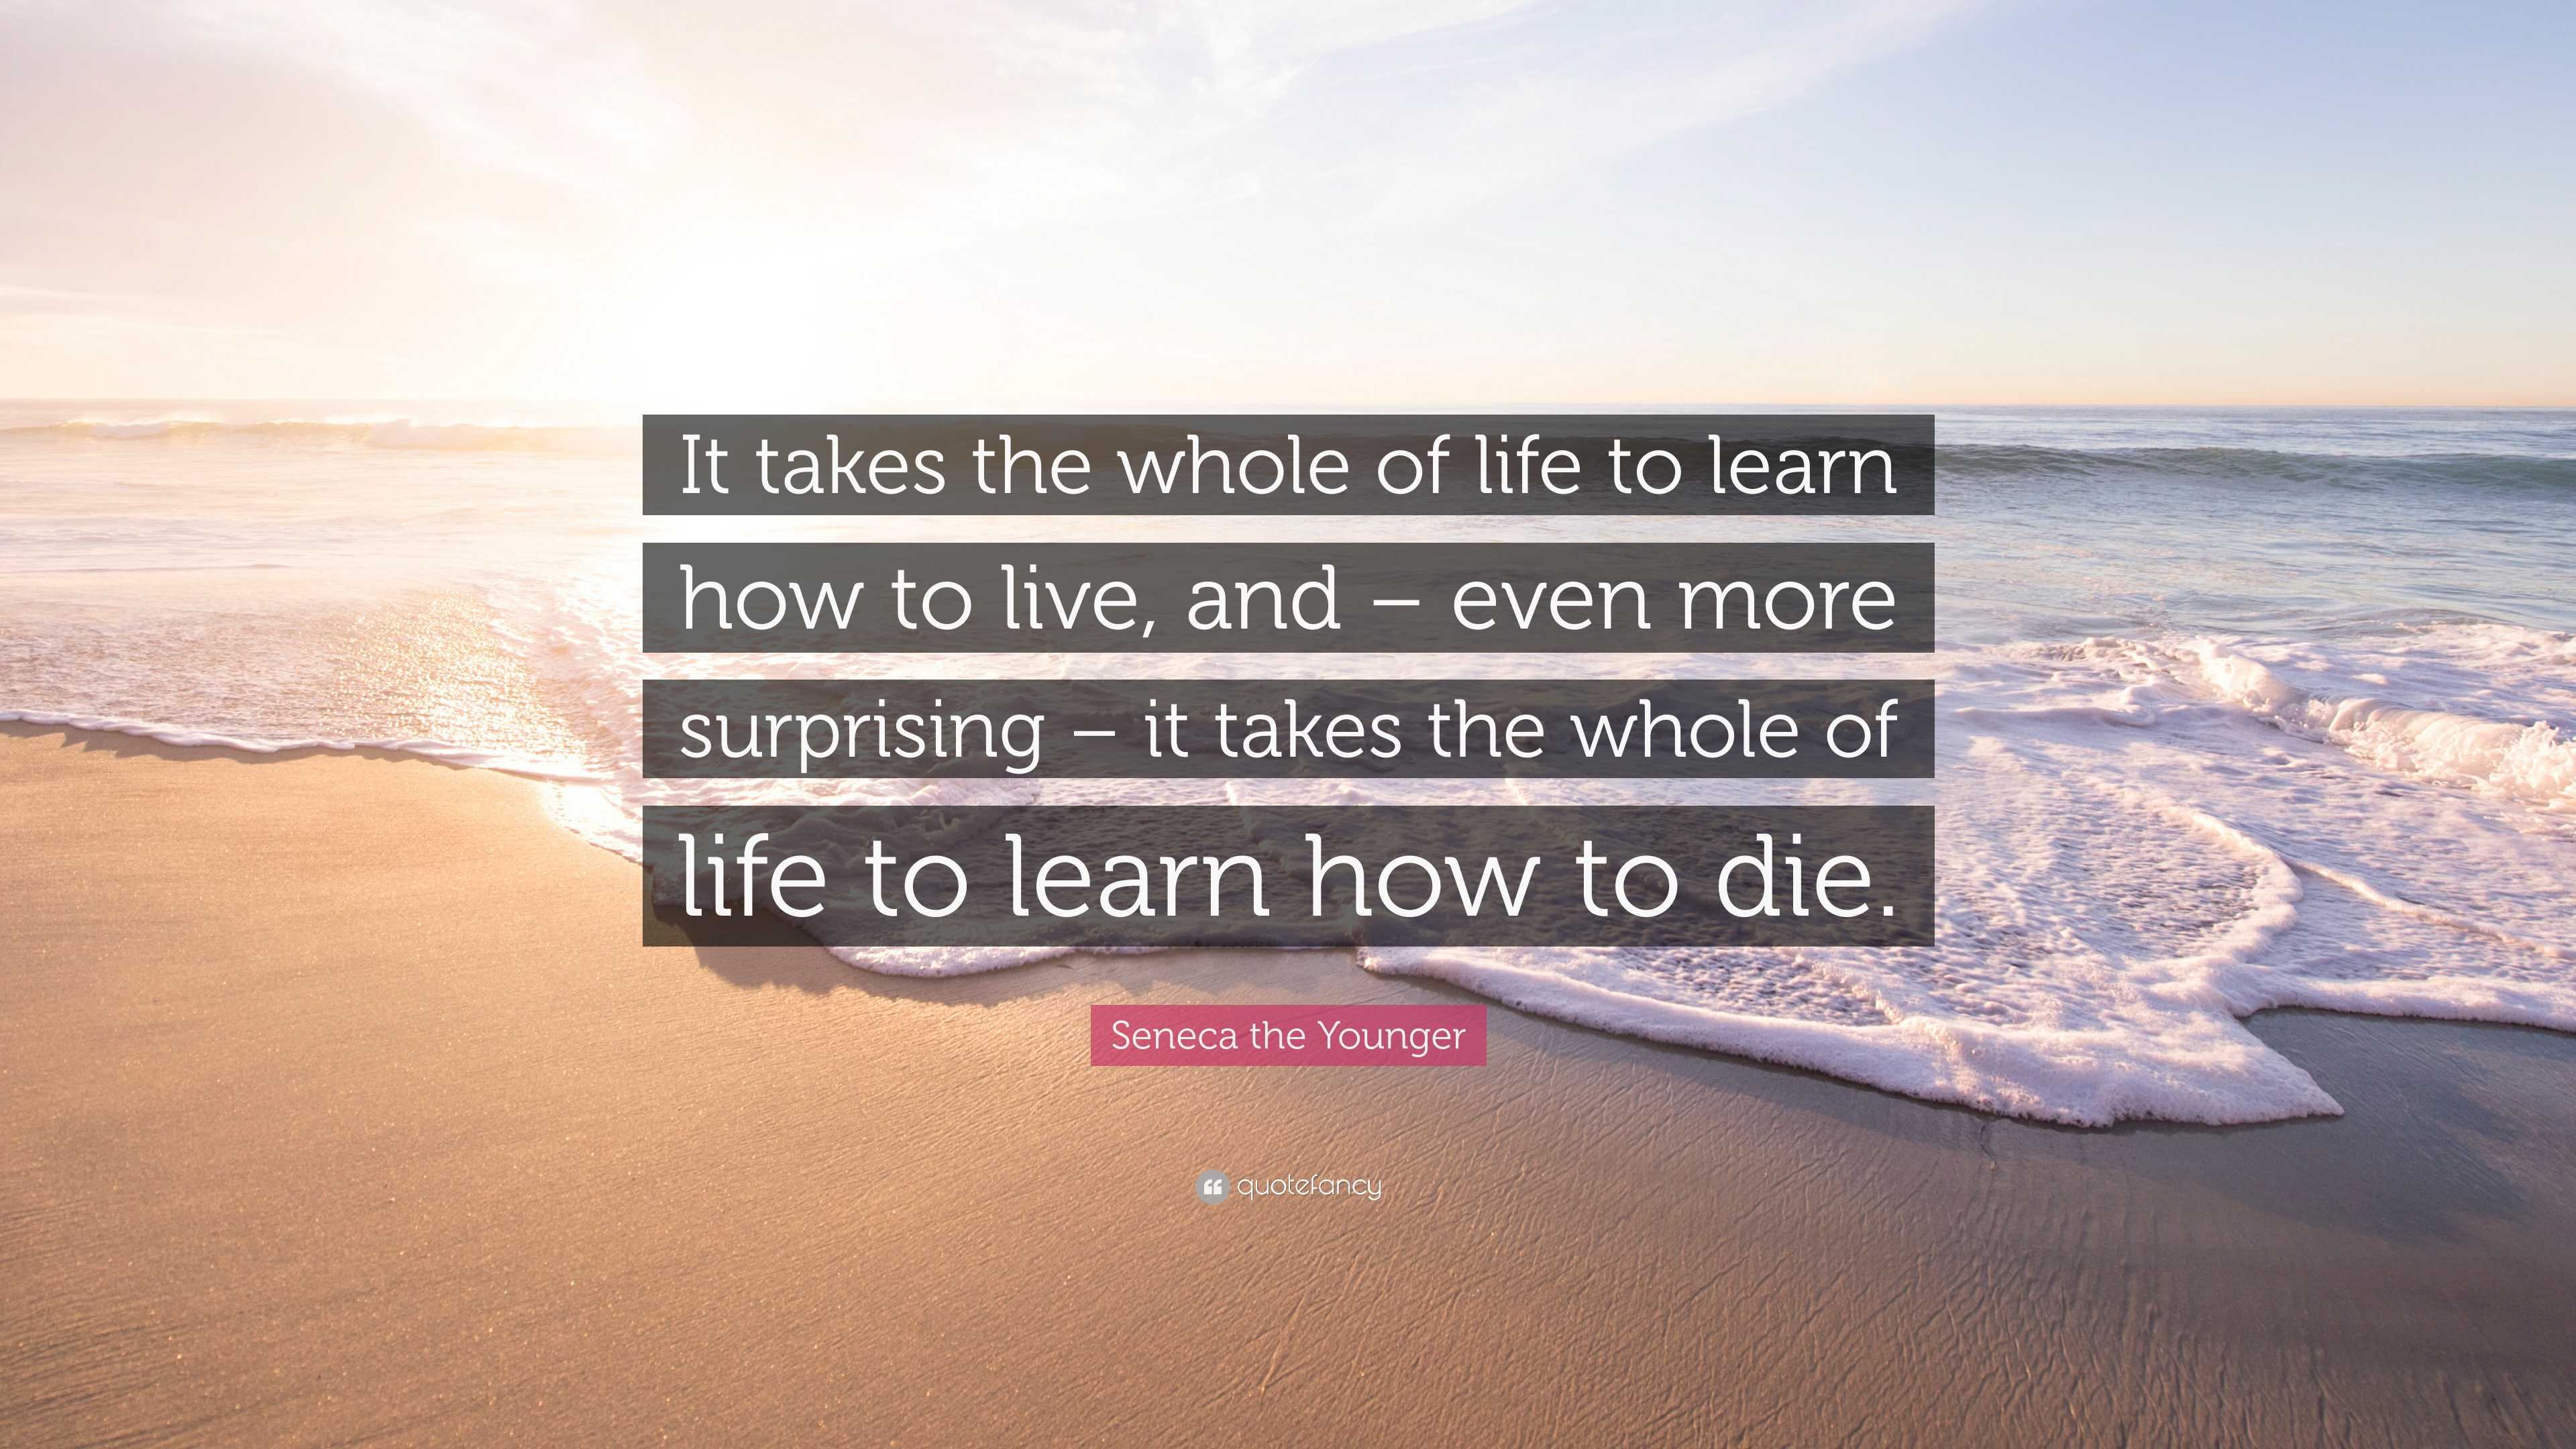 https://quotefancy.com/media/wallpaper/3840x2160/7914659-Seneca-the-Younger-Quote-It-takes-the-whole-of-life-to-learn-how.jpg